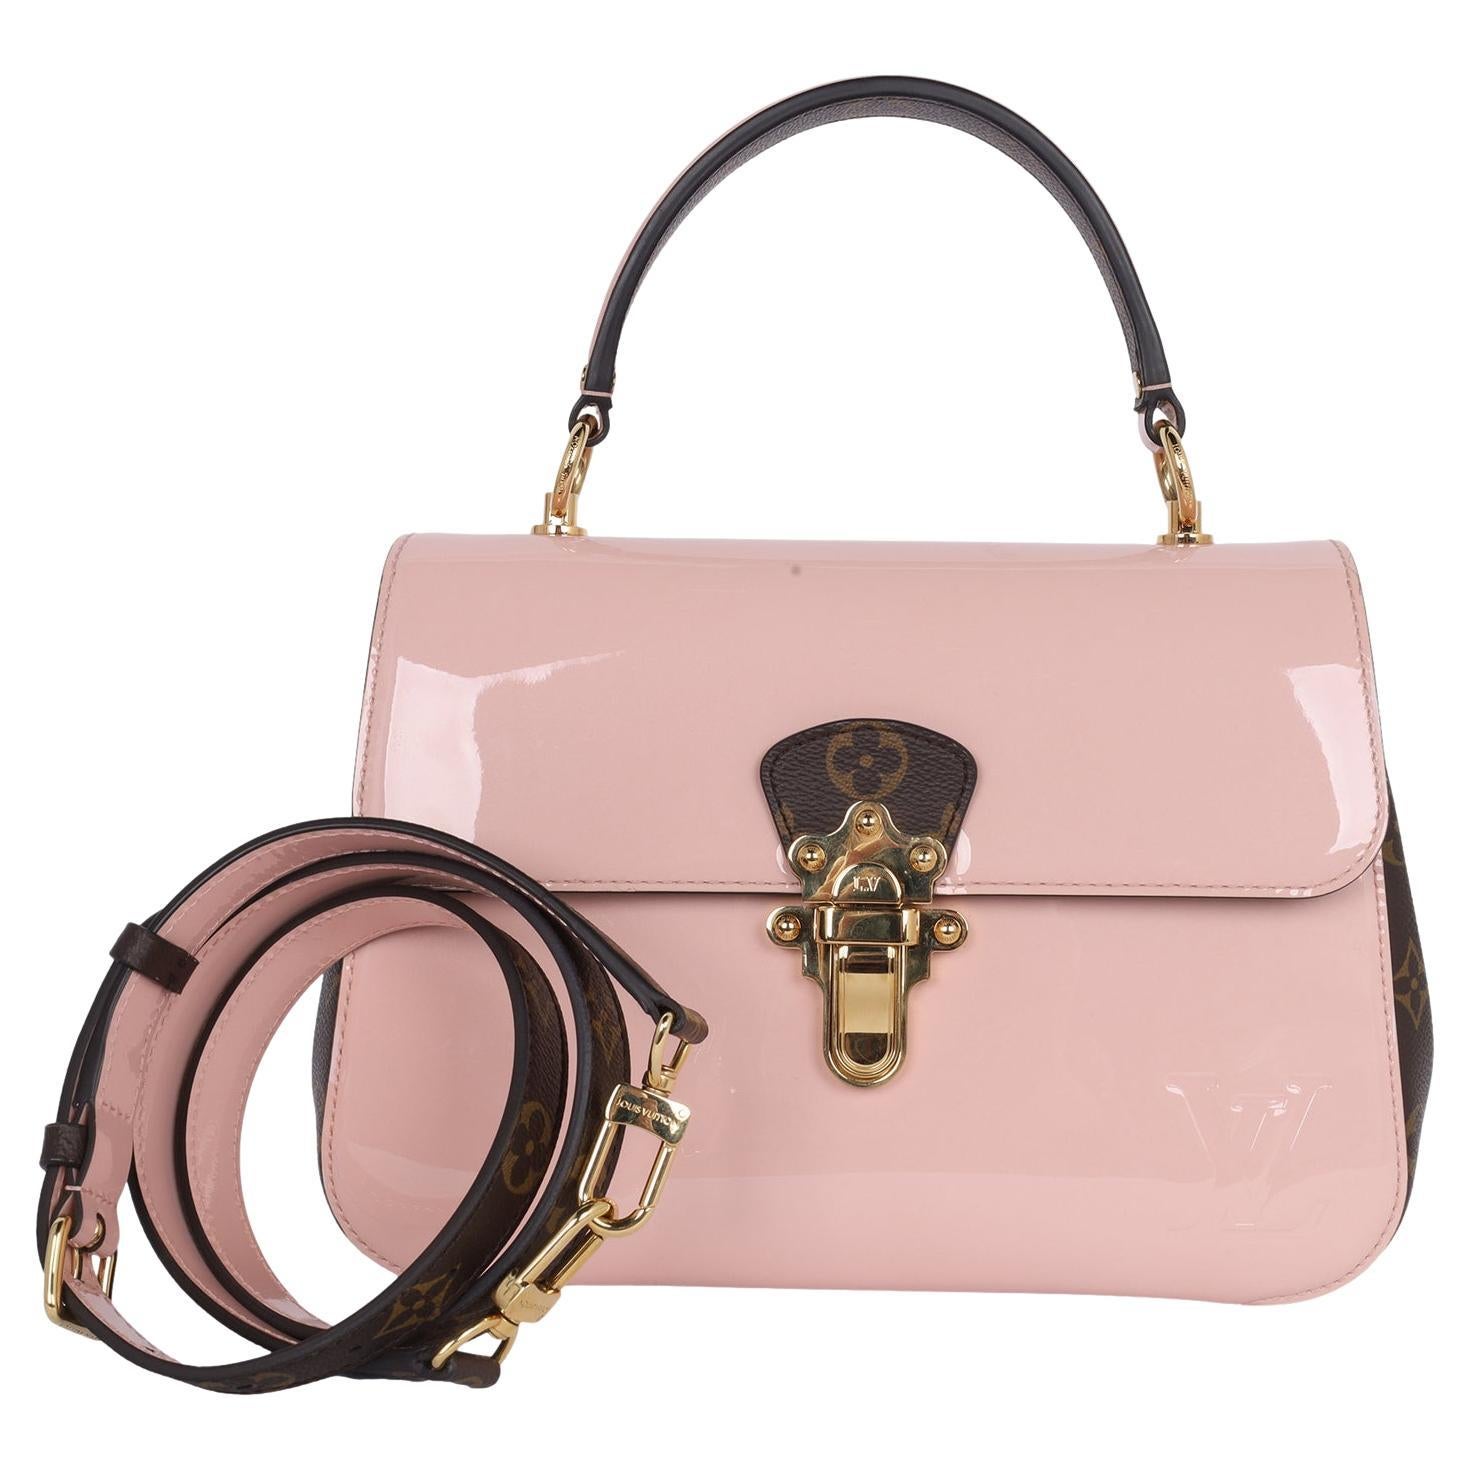 Authentic Pre Owned Louis Vuitton Vernis Leather Monogram Cherrywood Crossbody Shoulder Bag. This stylish shoulder bag features a top handle, a mirror glossy patent leather in pink with Louis Vuitton monogram coated canvas sides, polished gold